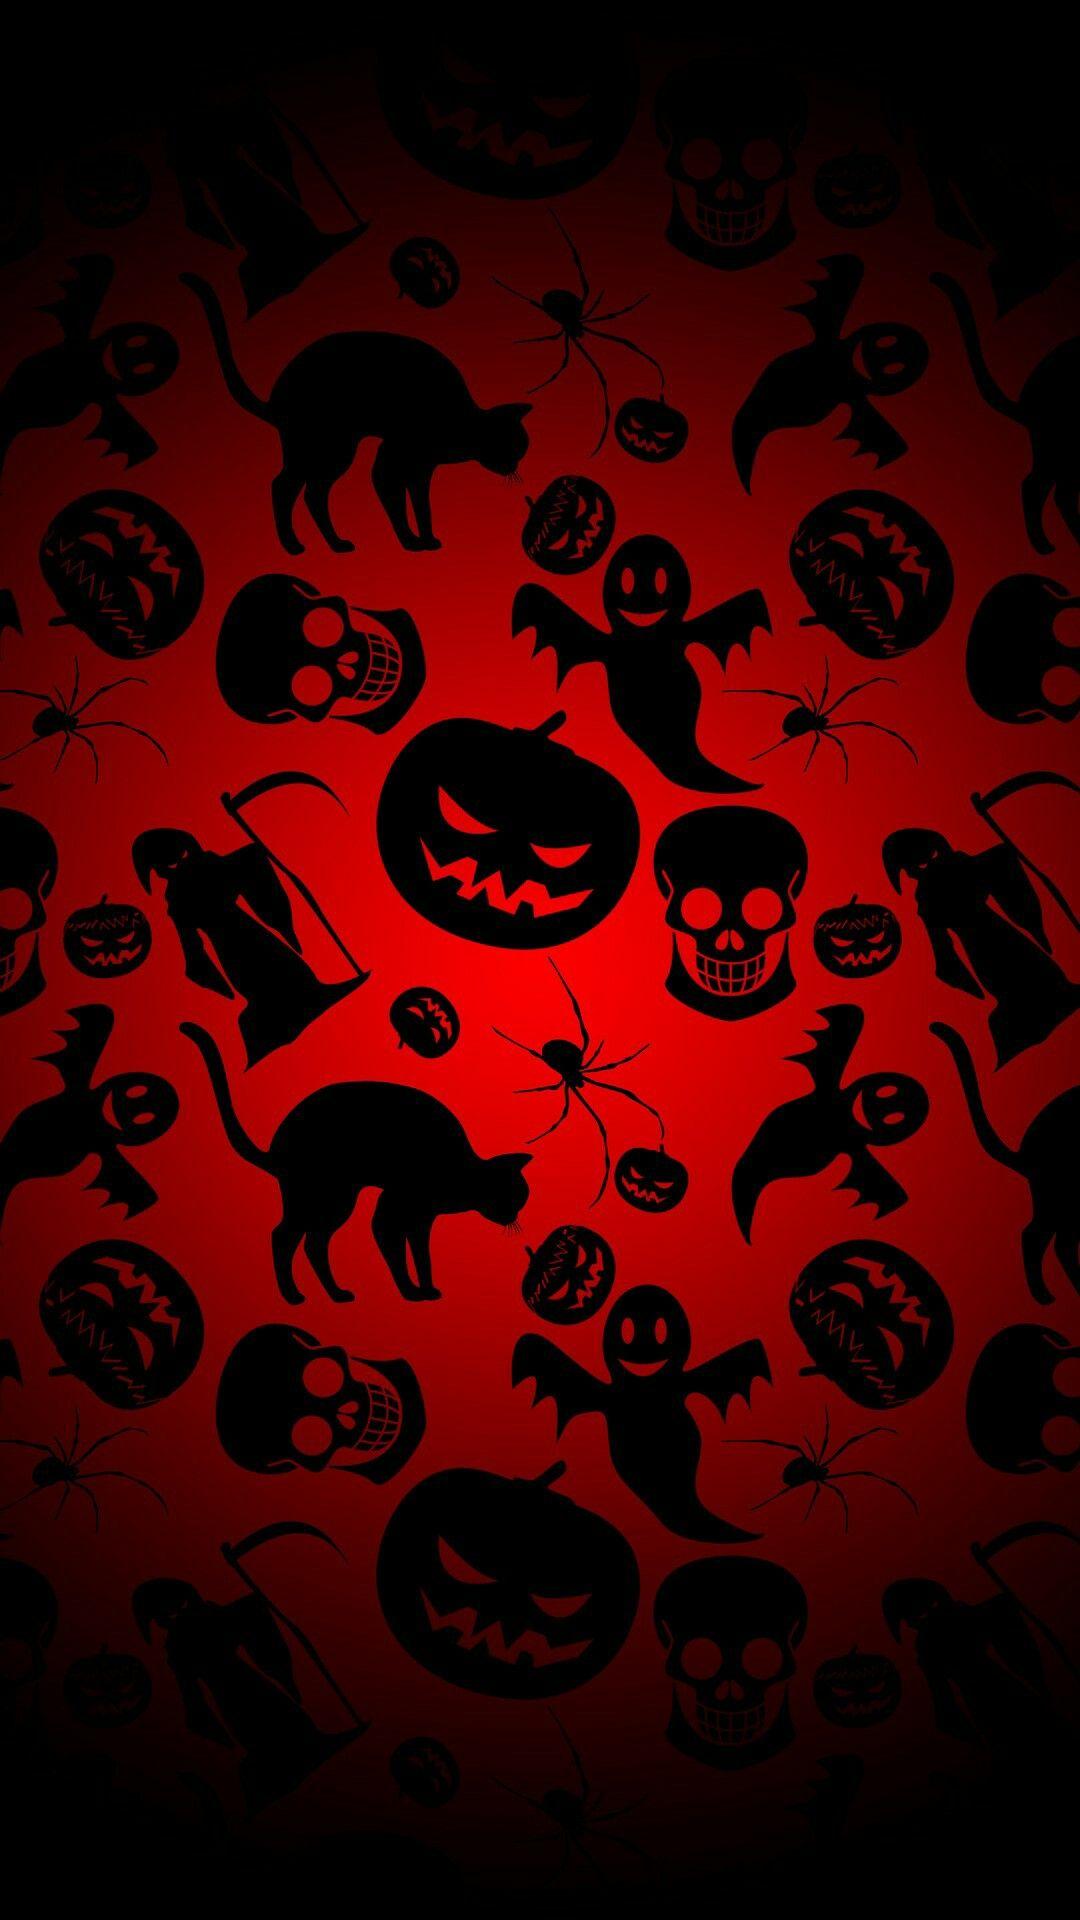 Cats, Spiders, Jack O' Lanterns, Ghosts In Black And Red Wallpaper Image, 1. Halloween Wallpaper, Halloween Wallpaper Iphone, Free Halloween Wallpaper